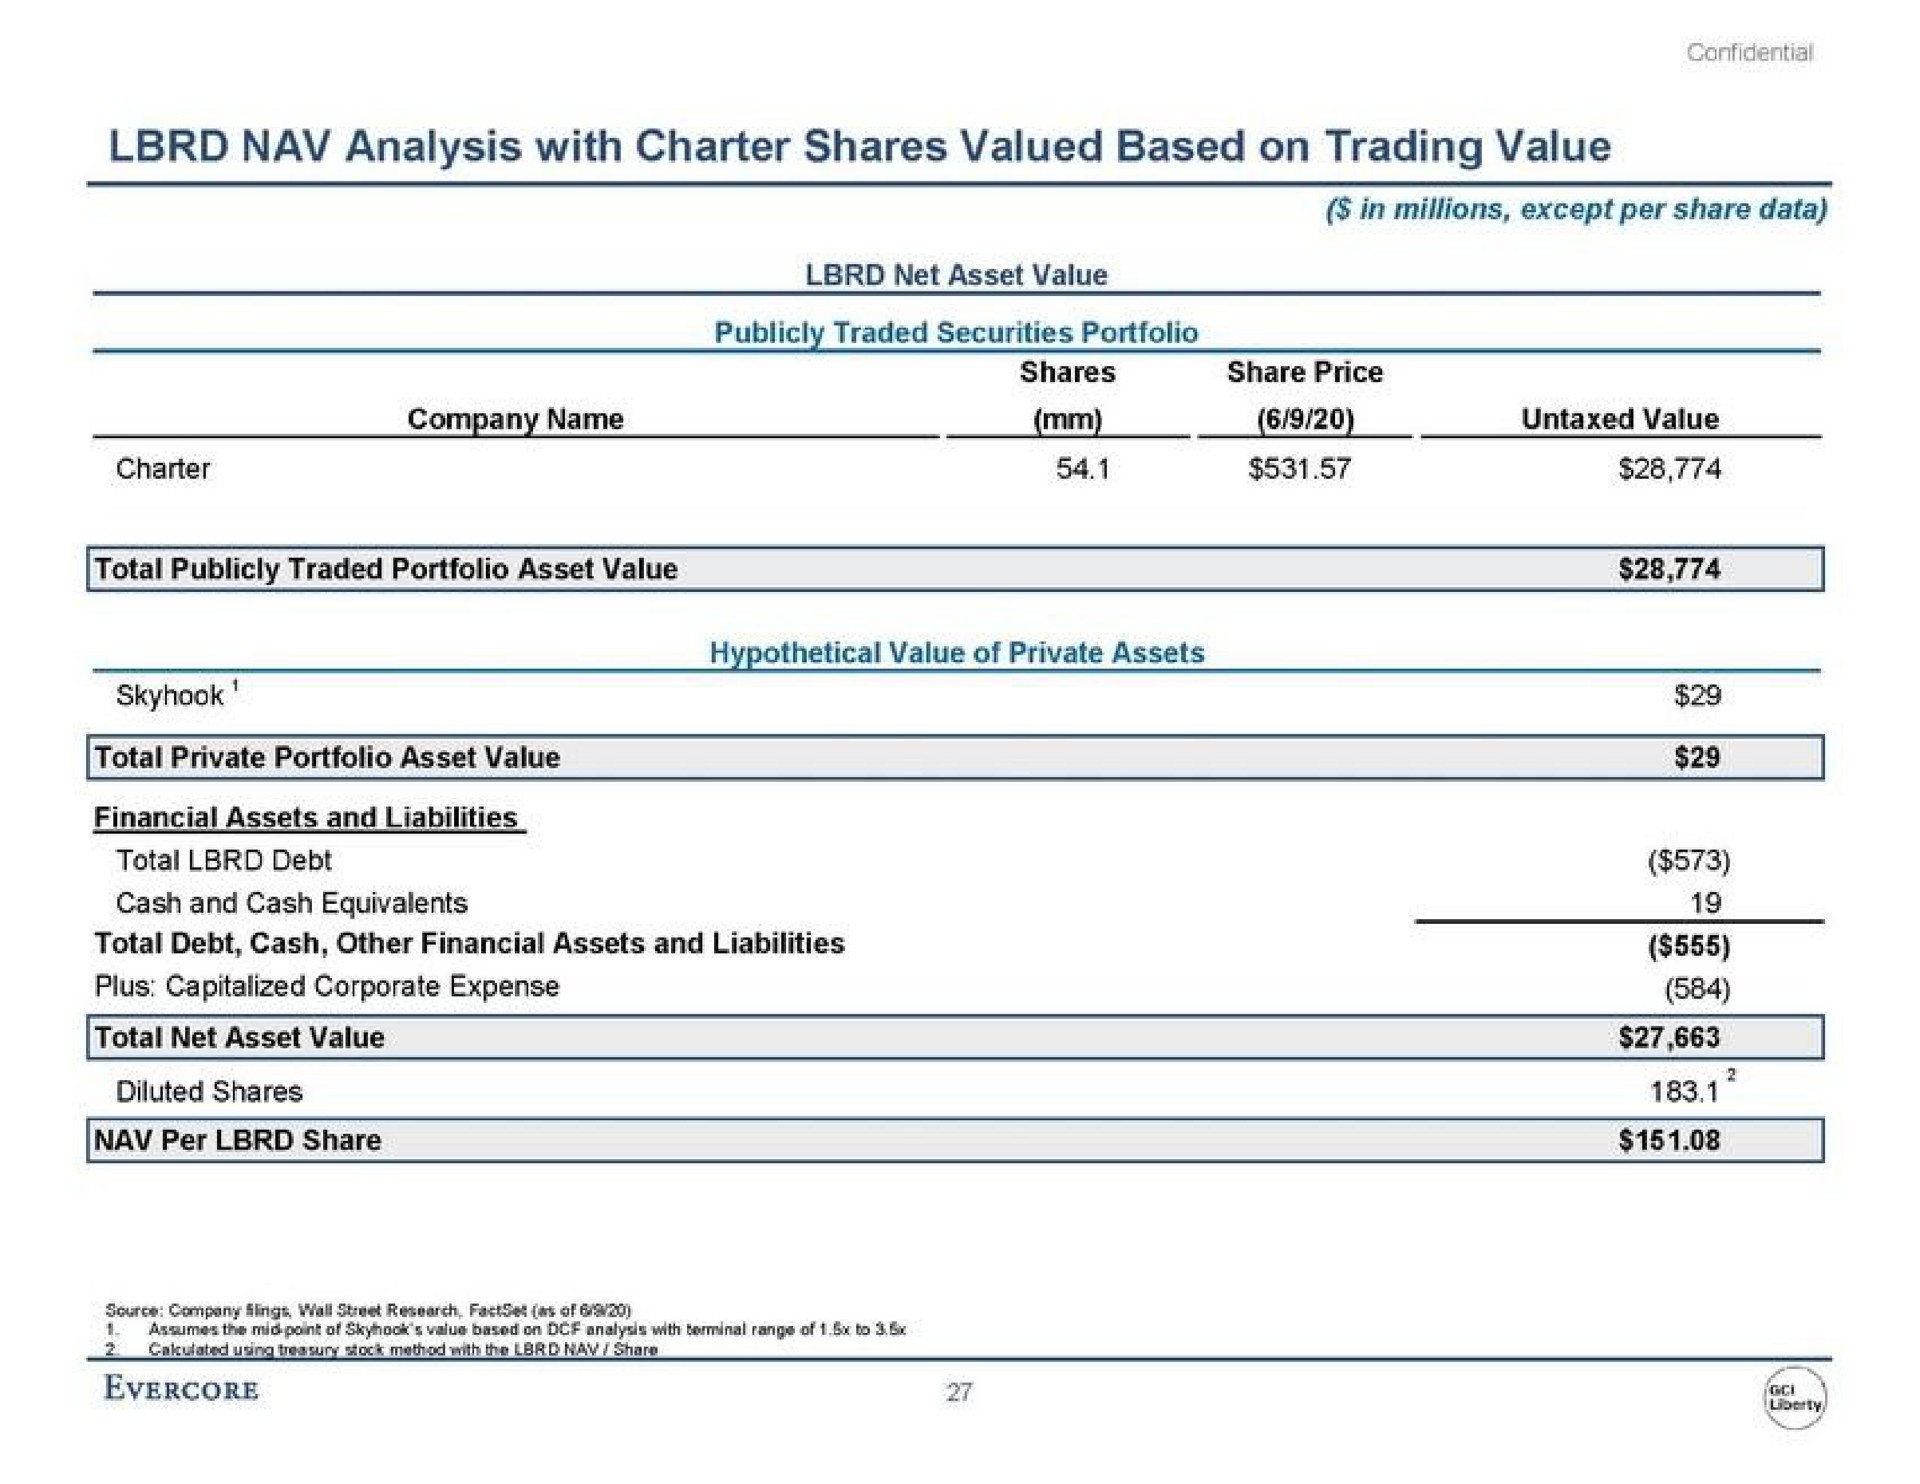 analysis with charter shares valued based on trading value total publicly traded portfolio asset value total debt total net asset value diluted shares | Evercore